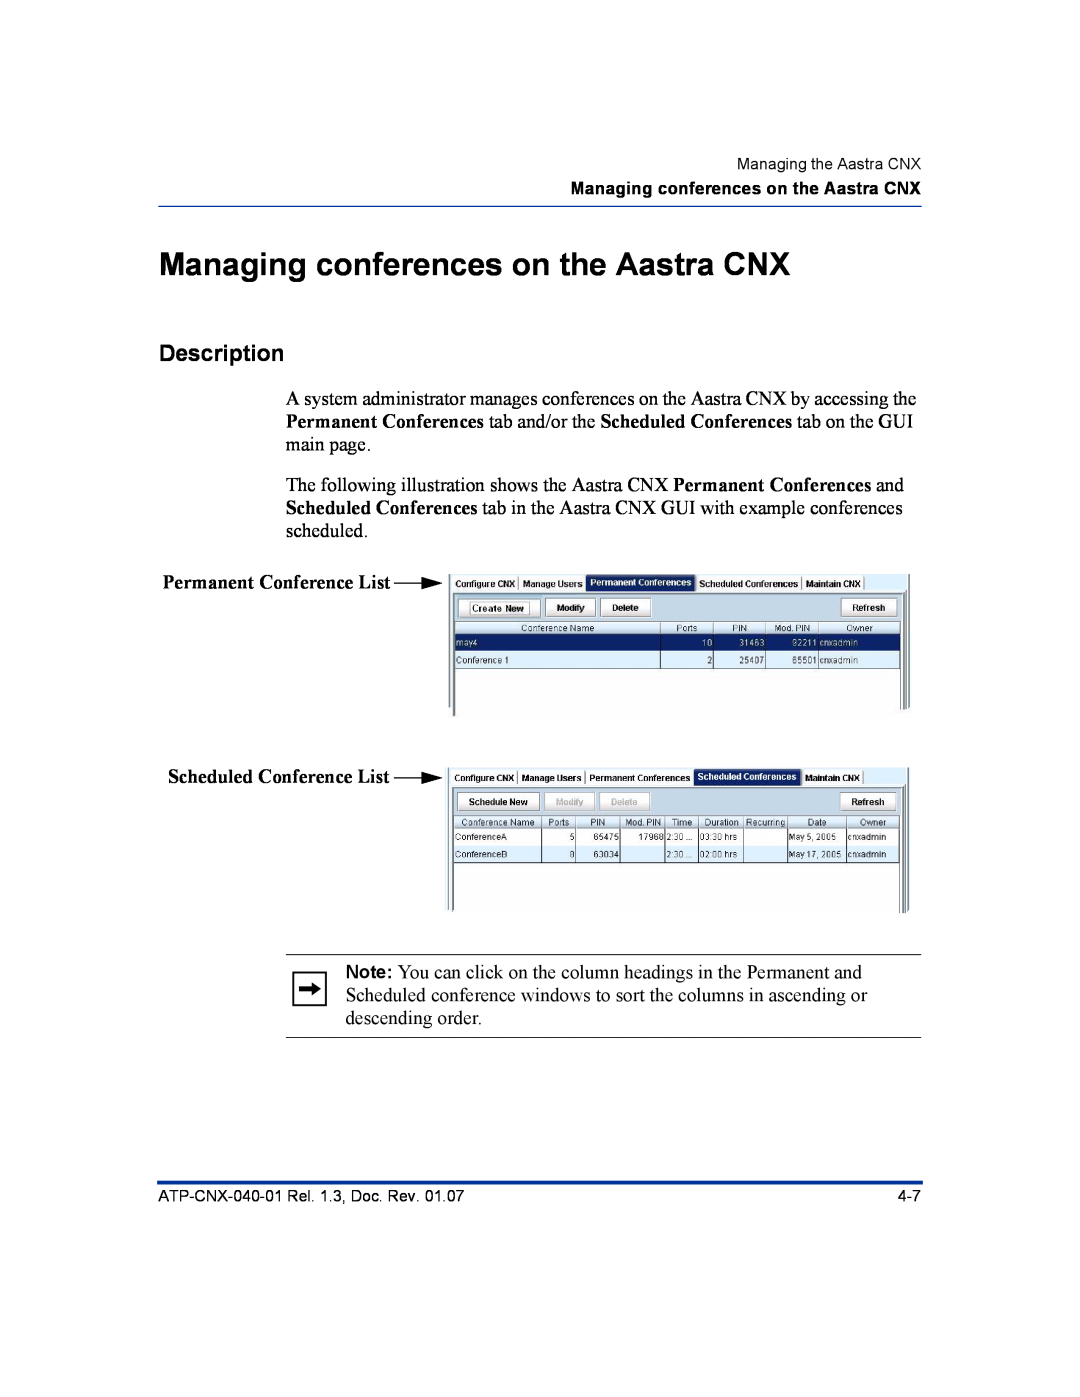 Aastra Telecom ATP-CNX-040-01 Managing conferences on the Aastra CNX, Permanent Conference List Scheduled Conference List 